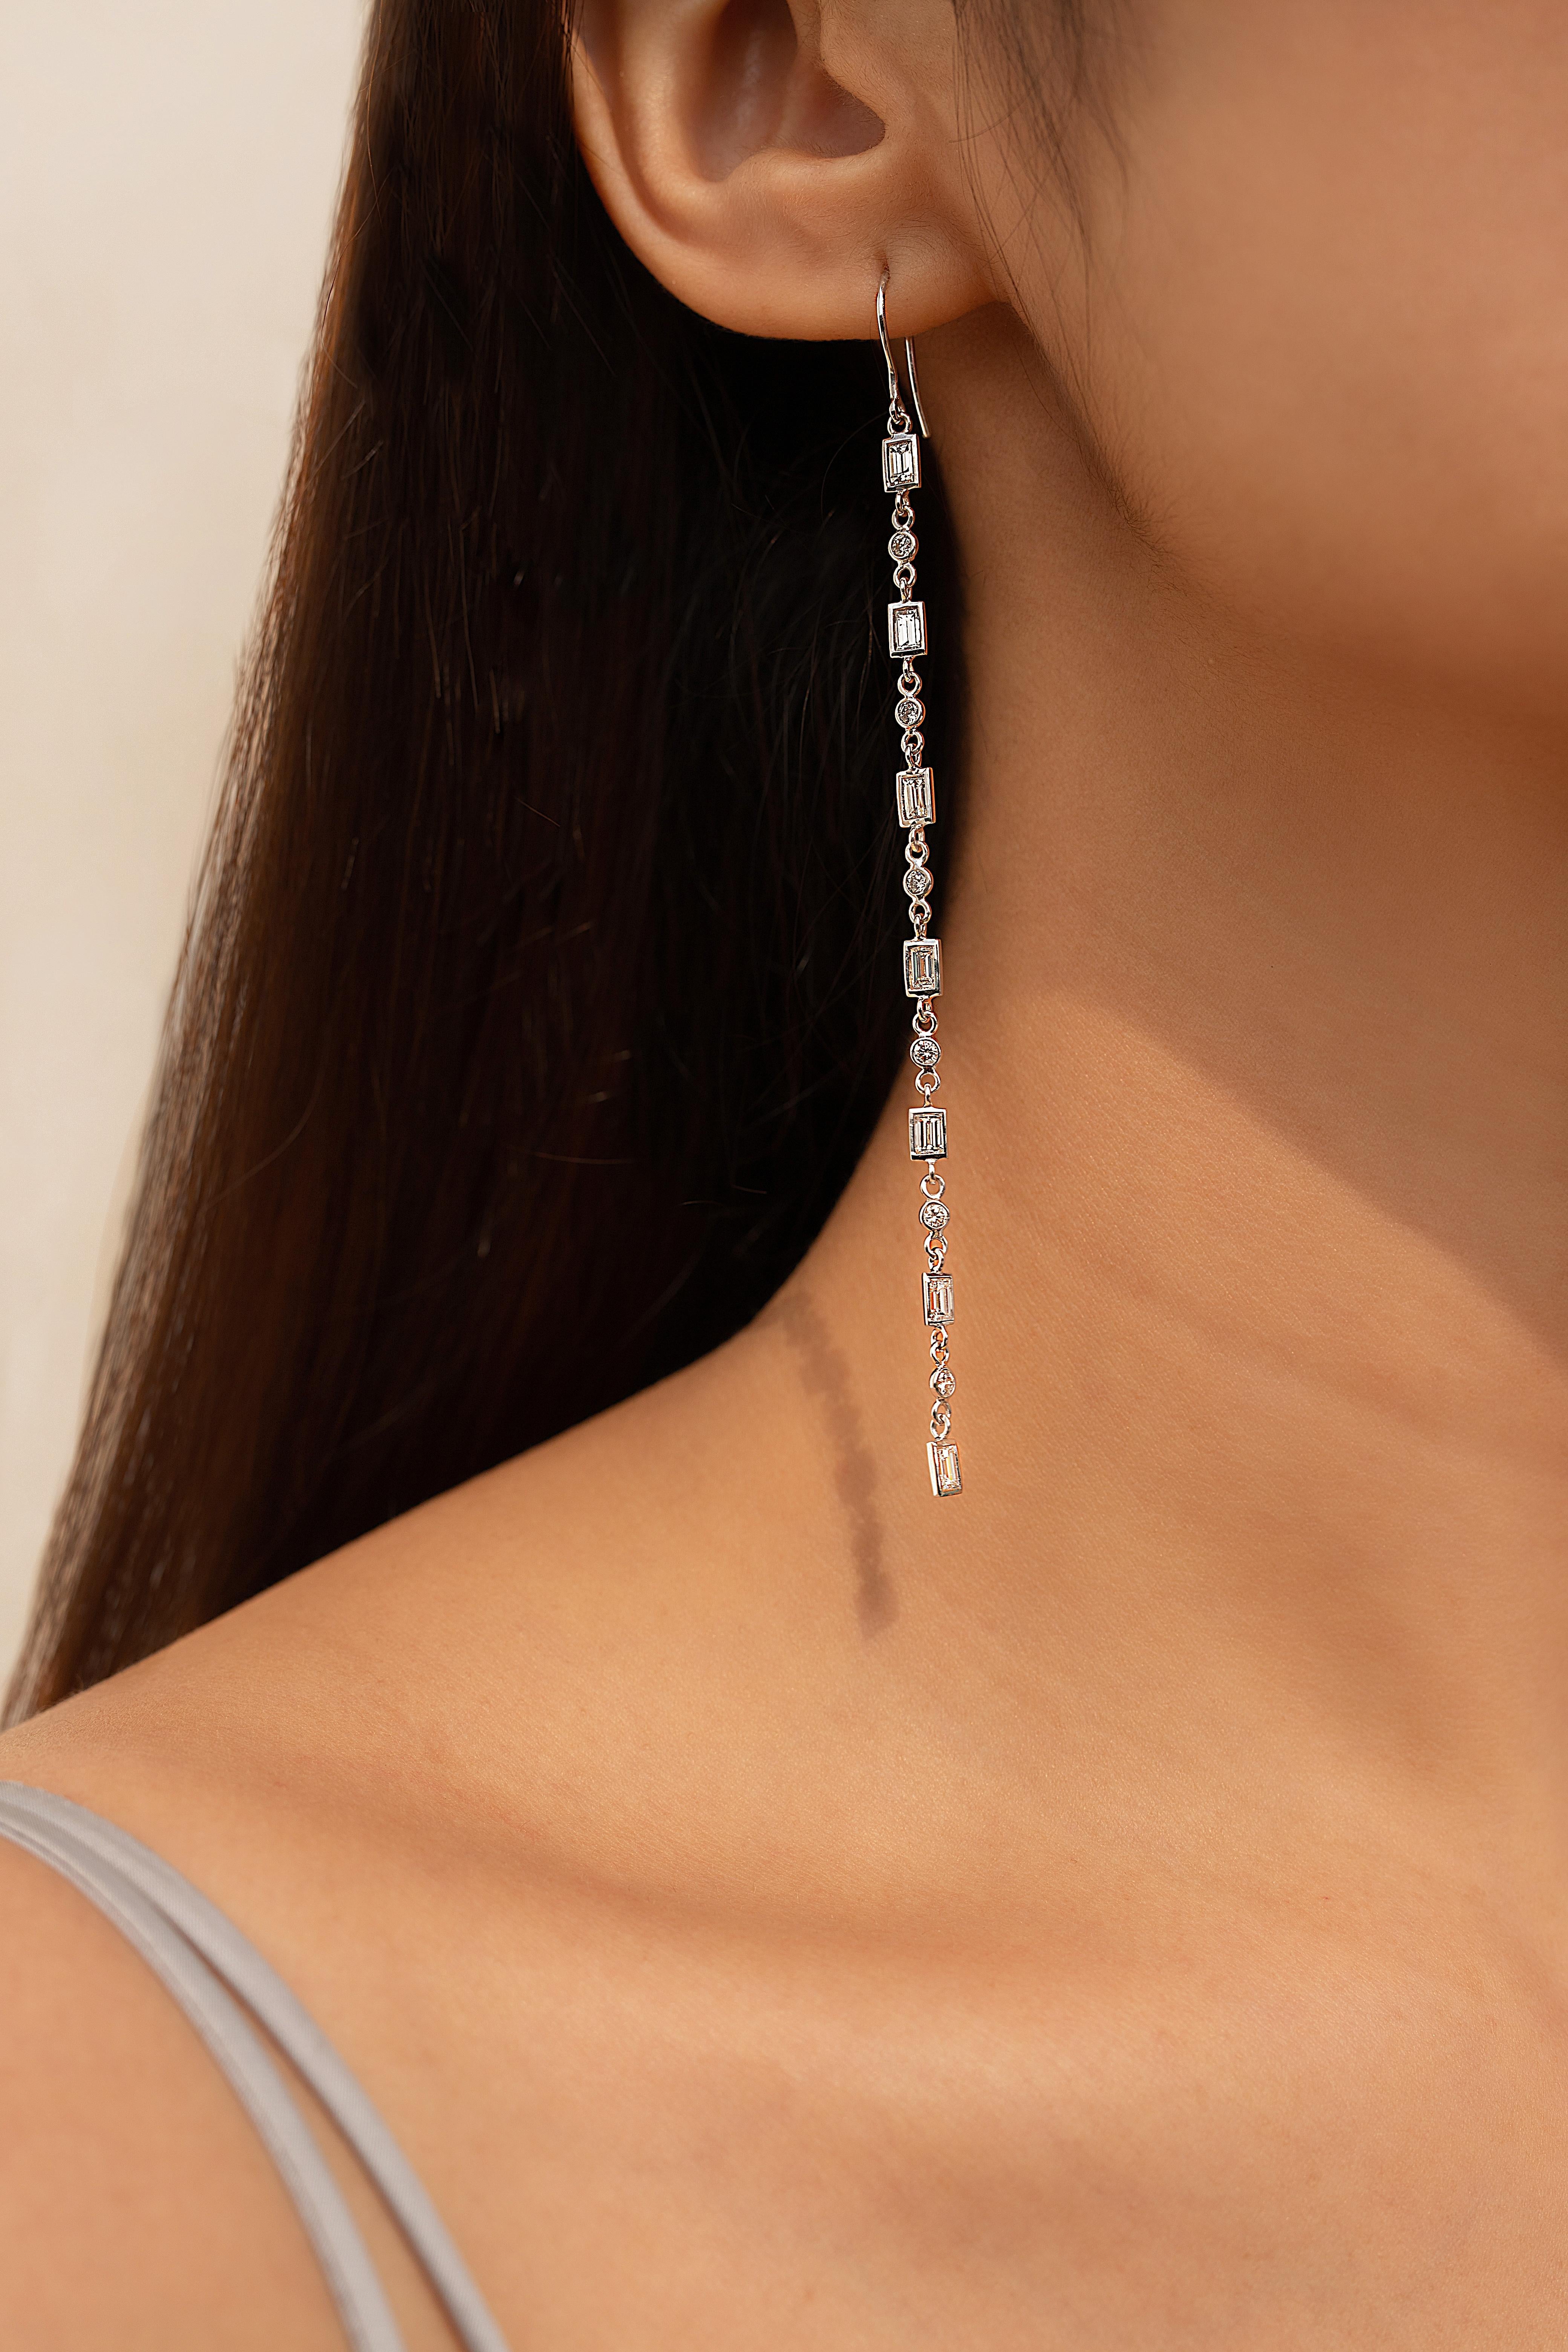 18K White Gold Shoulder Dust Diamond Dangle earrings to make a statement with your look. These earrings create a sparkling, luxurious look featuring octagon and round cut diamonds.
If you love to gravitate towards unique styles, this piece of